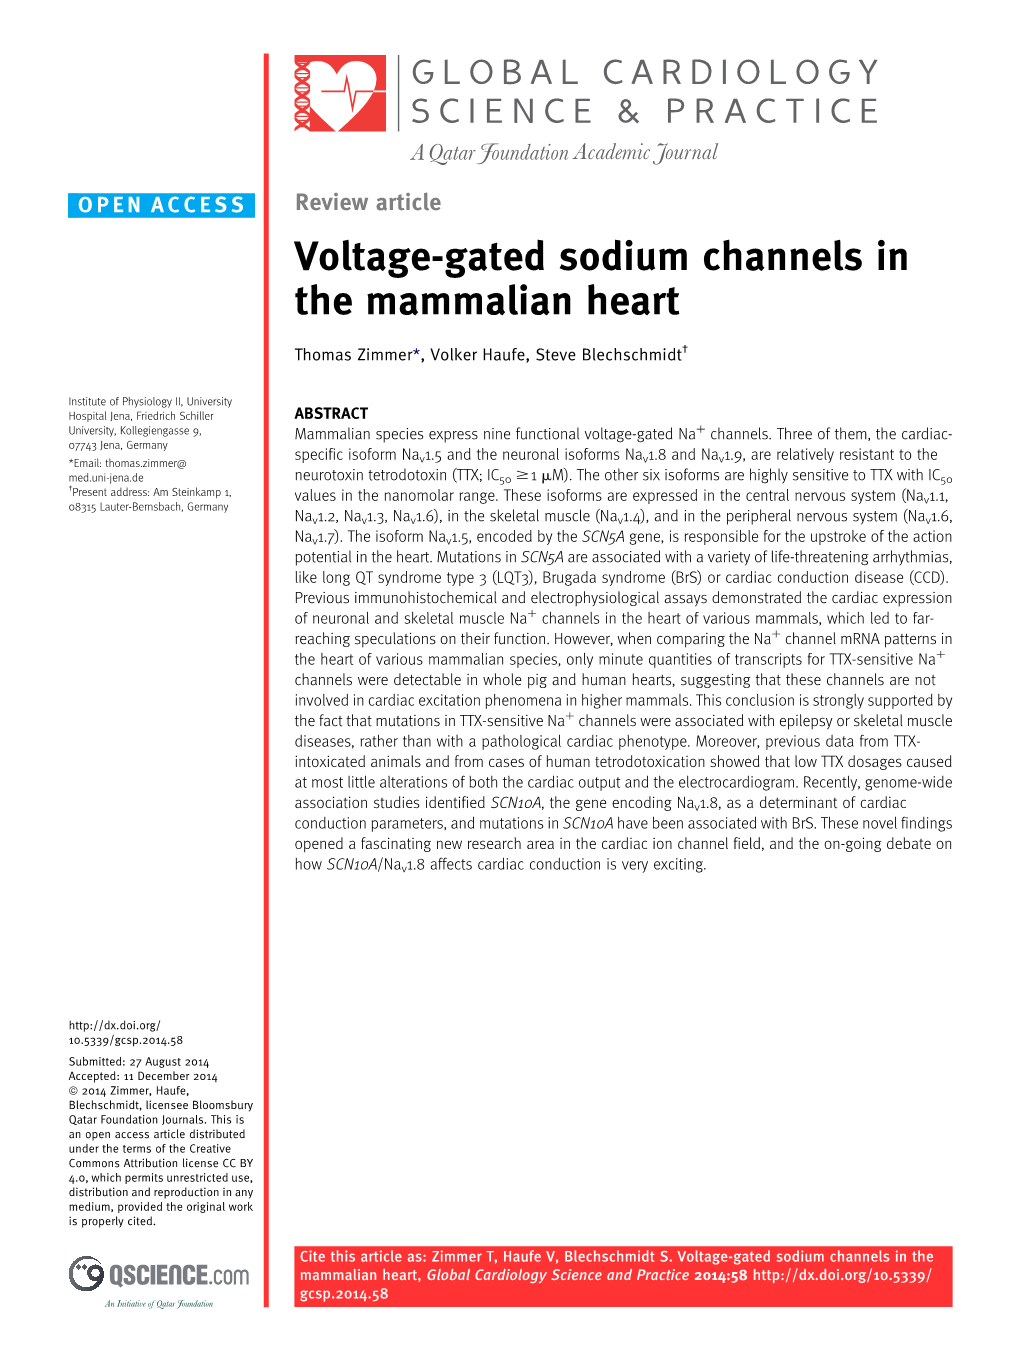 Voltage-Gated Sodium Channels in the Mammalian Heart